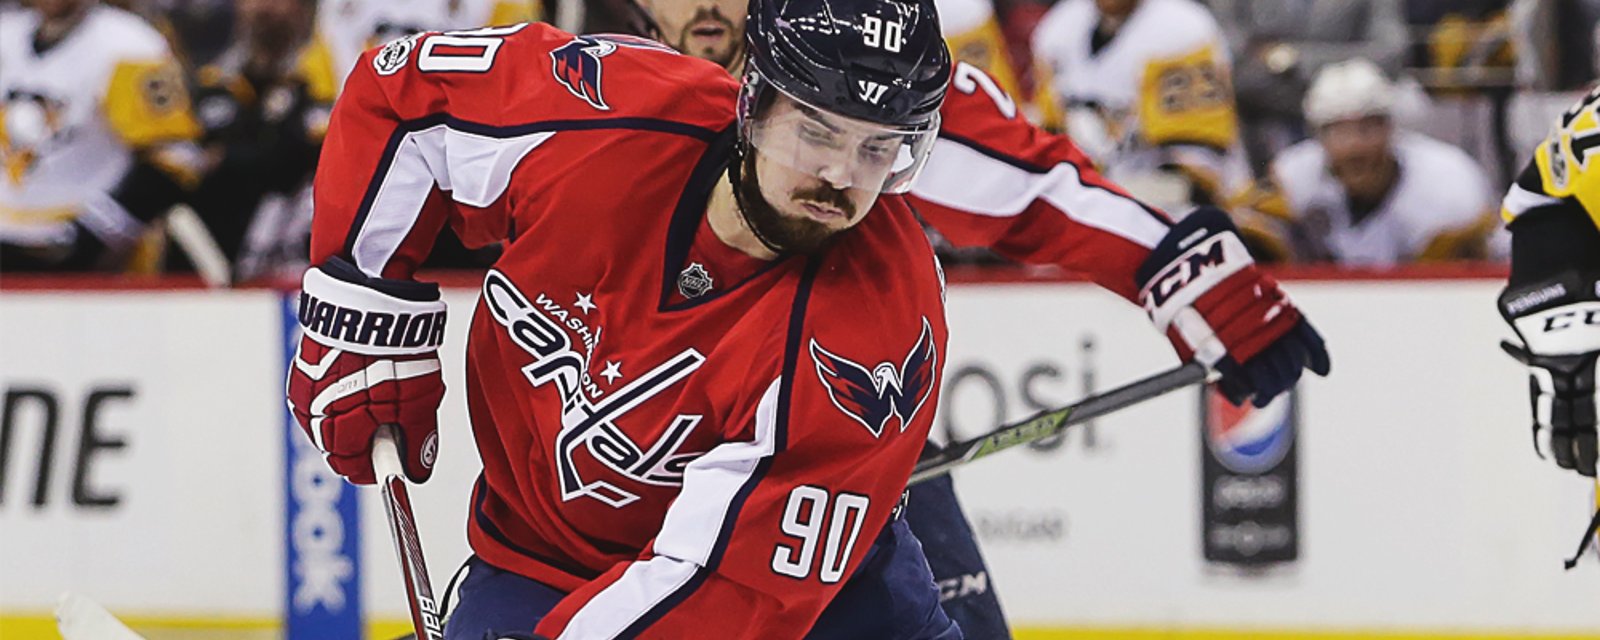 Report: The Devils could have immediate star forward with Marcus Johansson